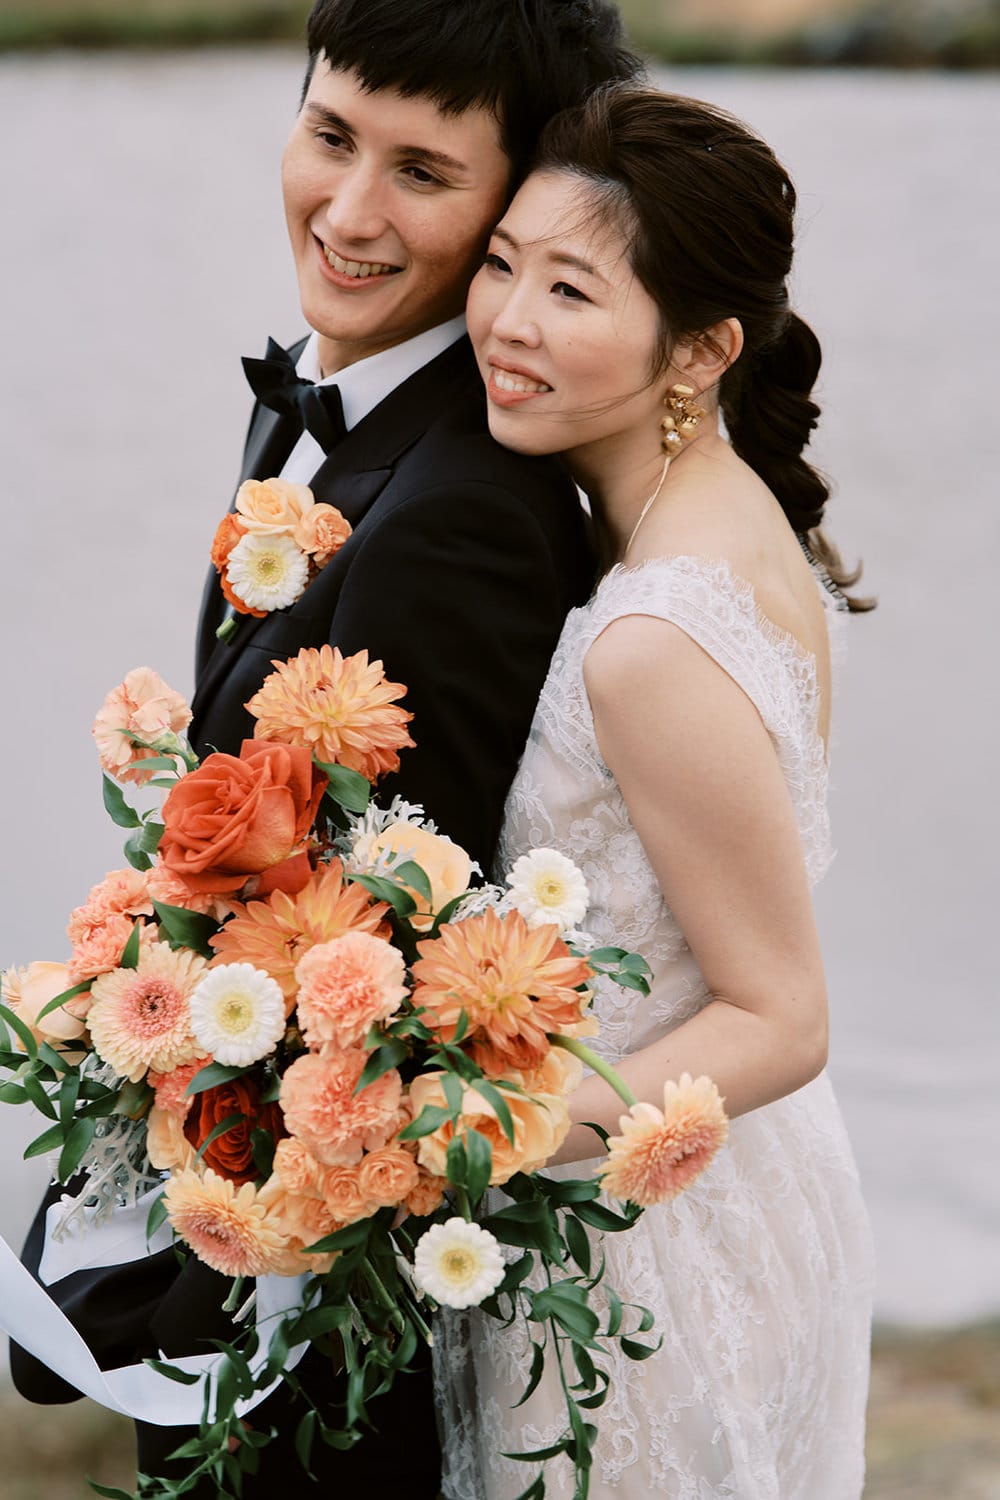 Queenstown New Zealand Heli Wedding Elopement Photographer クイーンズタウン　ニュージーランド　エロープメント 結婚式 | A bride and groom embracing and smiling on their wedding day, with the bride holding a bouquet of orange flowers, captured beautifully by YURI, a Queenstown Wedding Photographer.